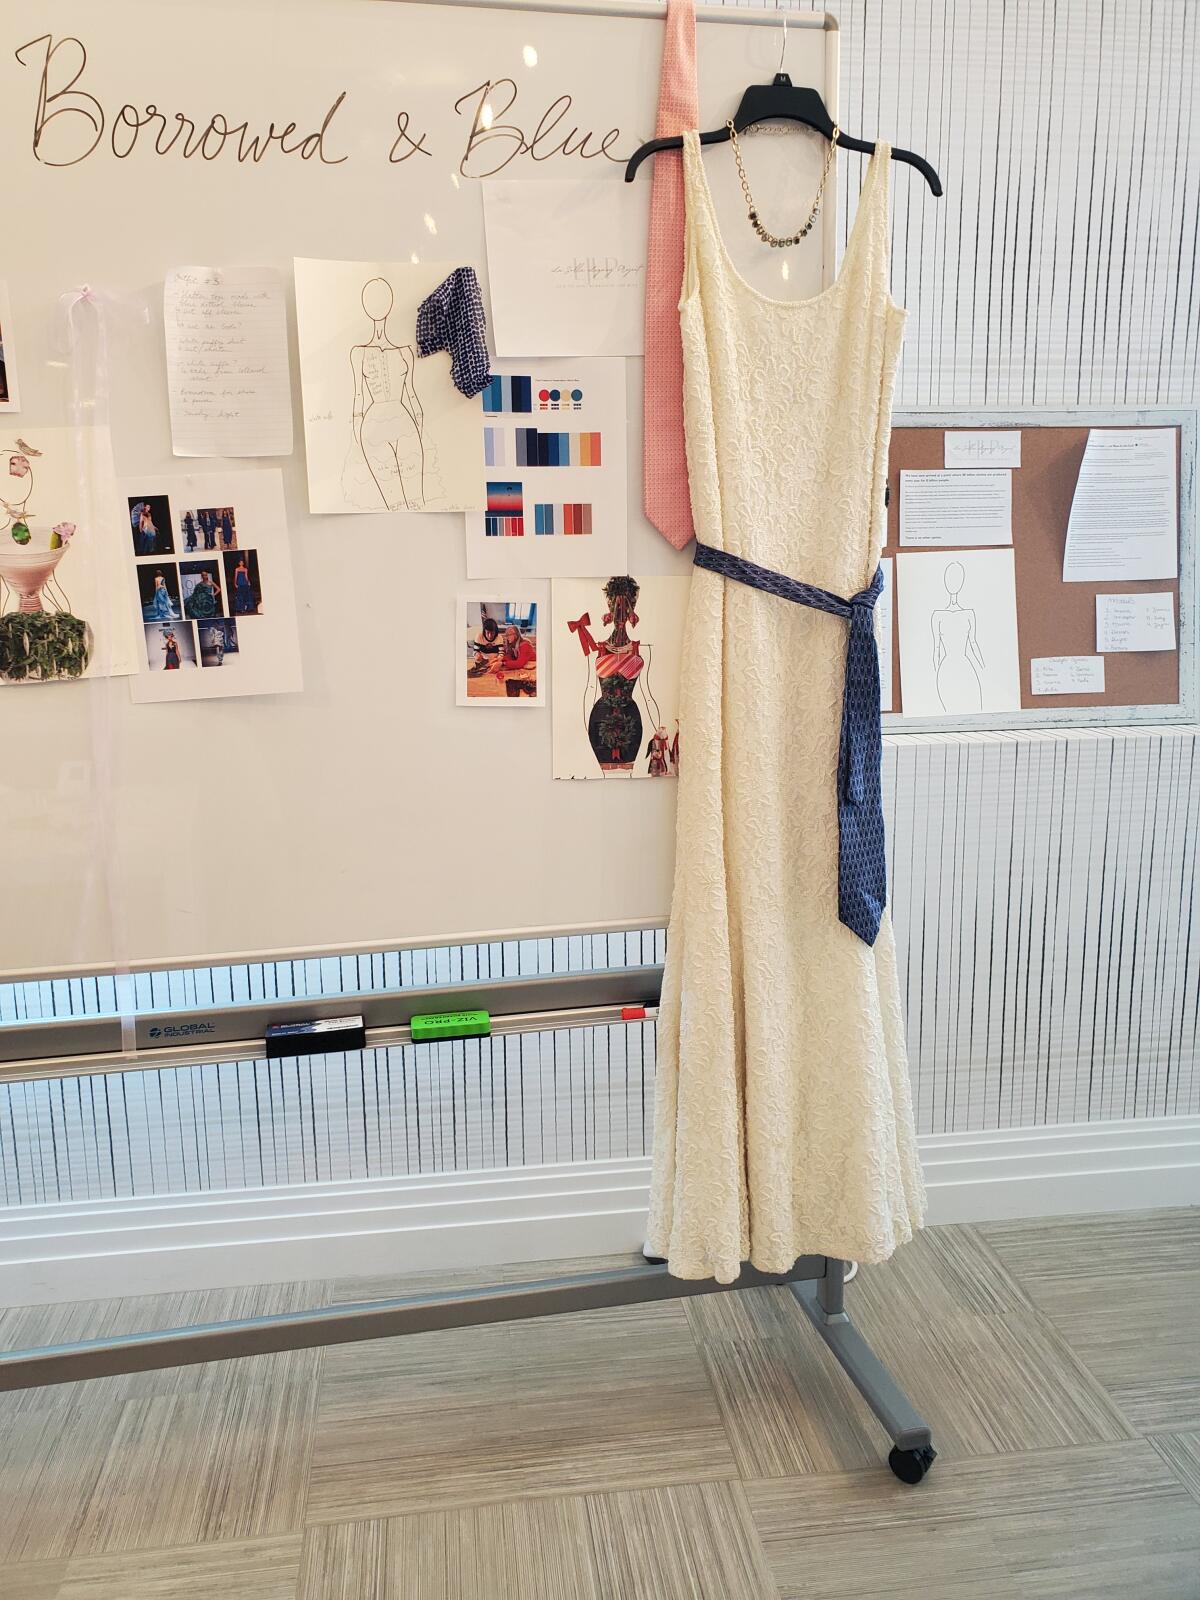 This concept outfit and vision board were created for the Belmont Village La Jolla upcycled fashion line.